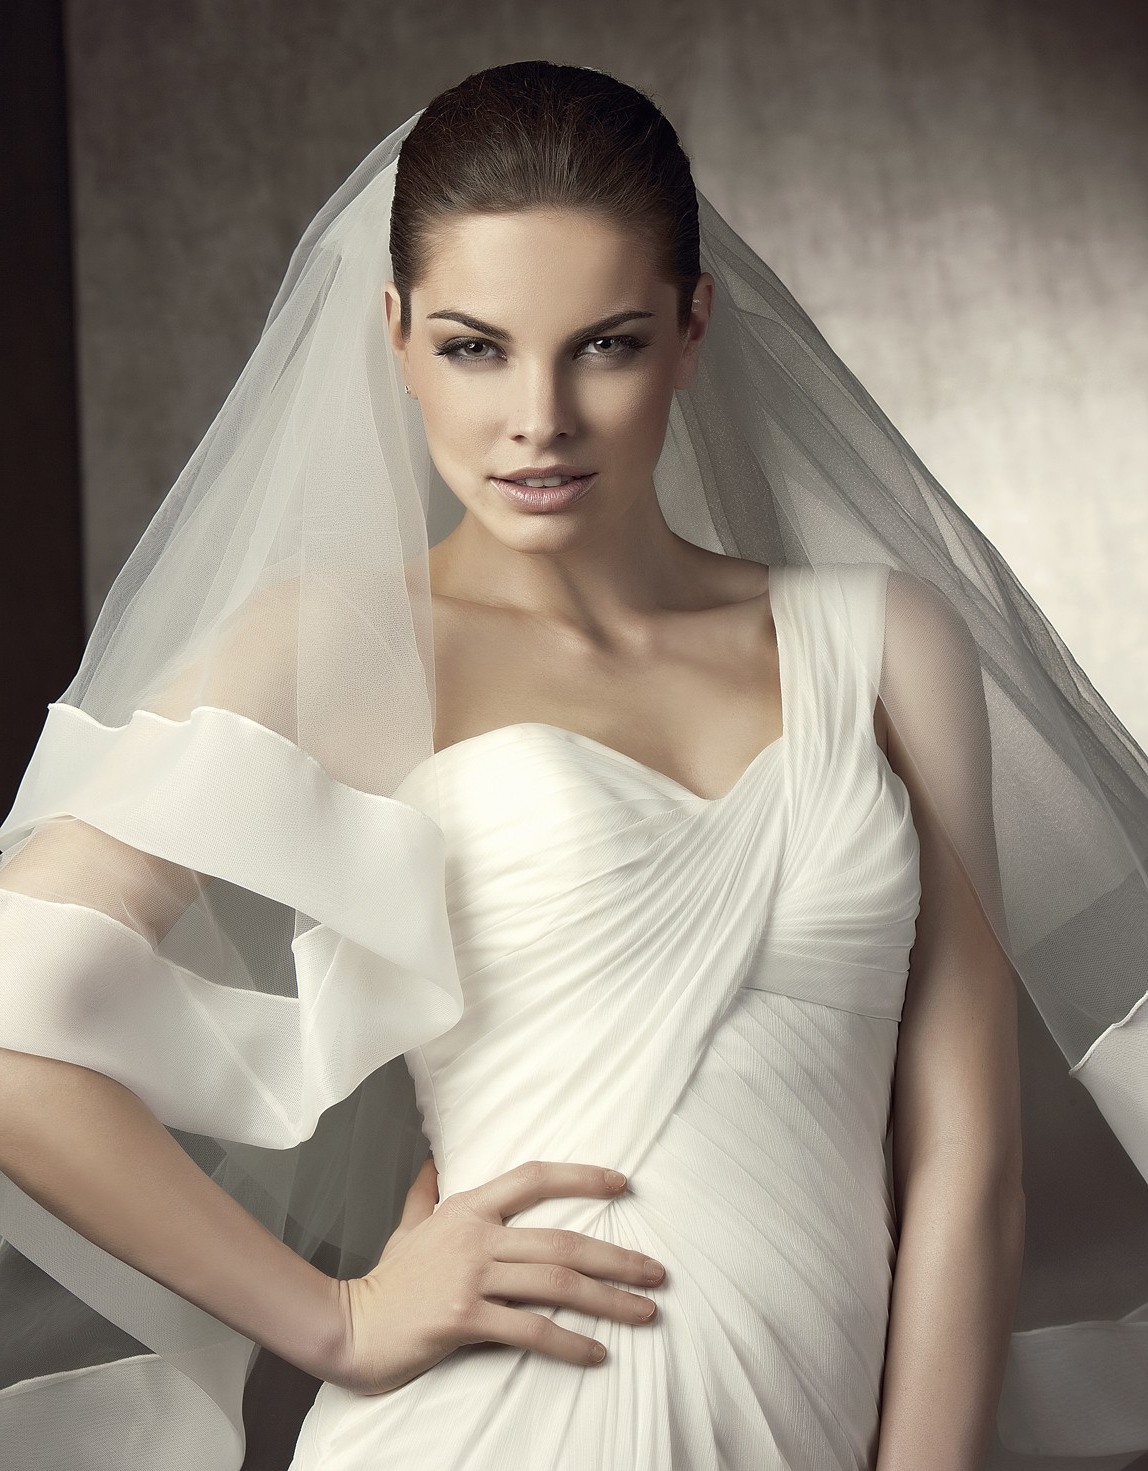 bridal-hairstyles-with-veil-and-headpiece-wedding-hairstyles-updos-with-veil-long-white-wide-ribbon-edge